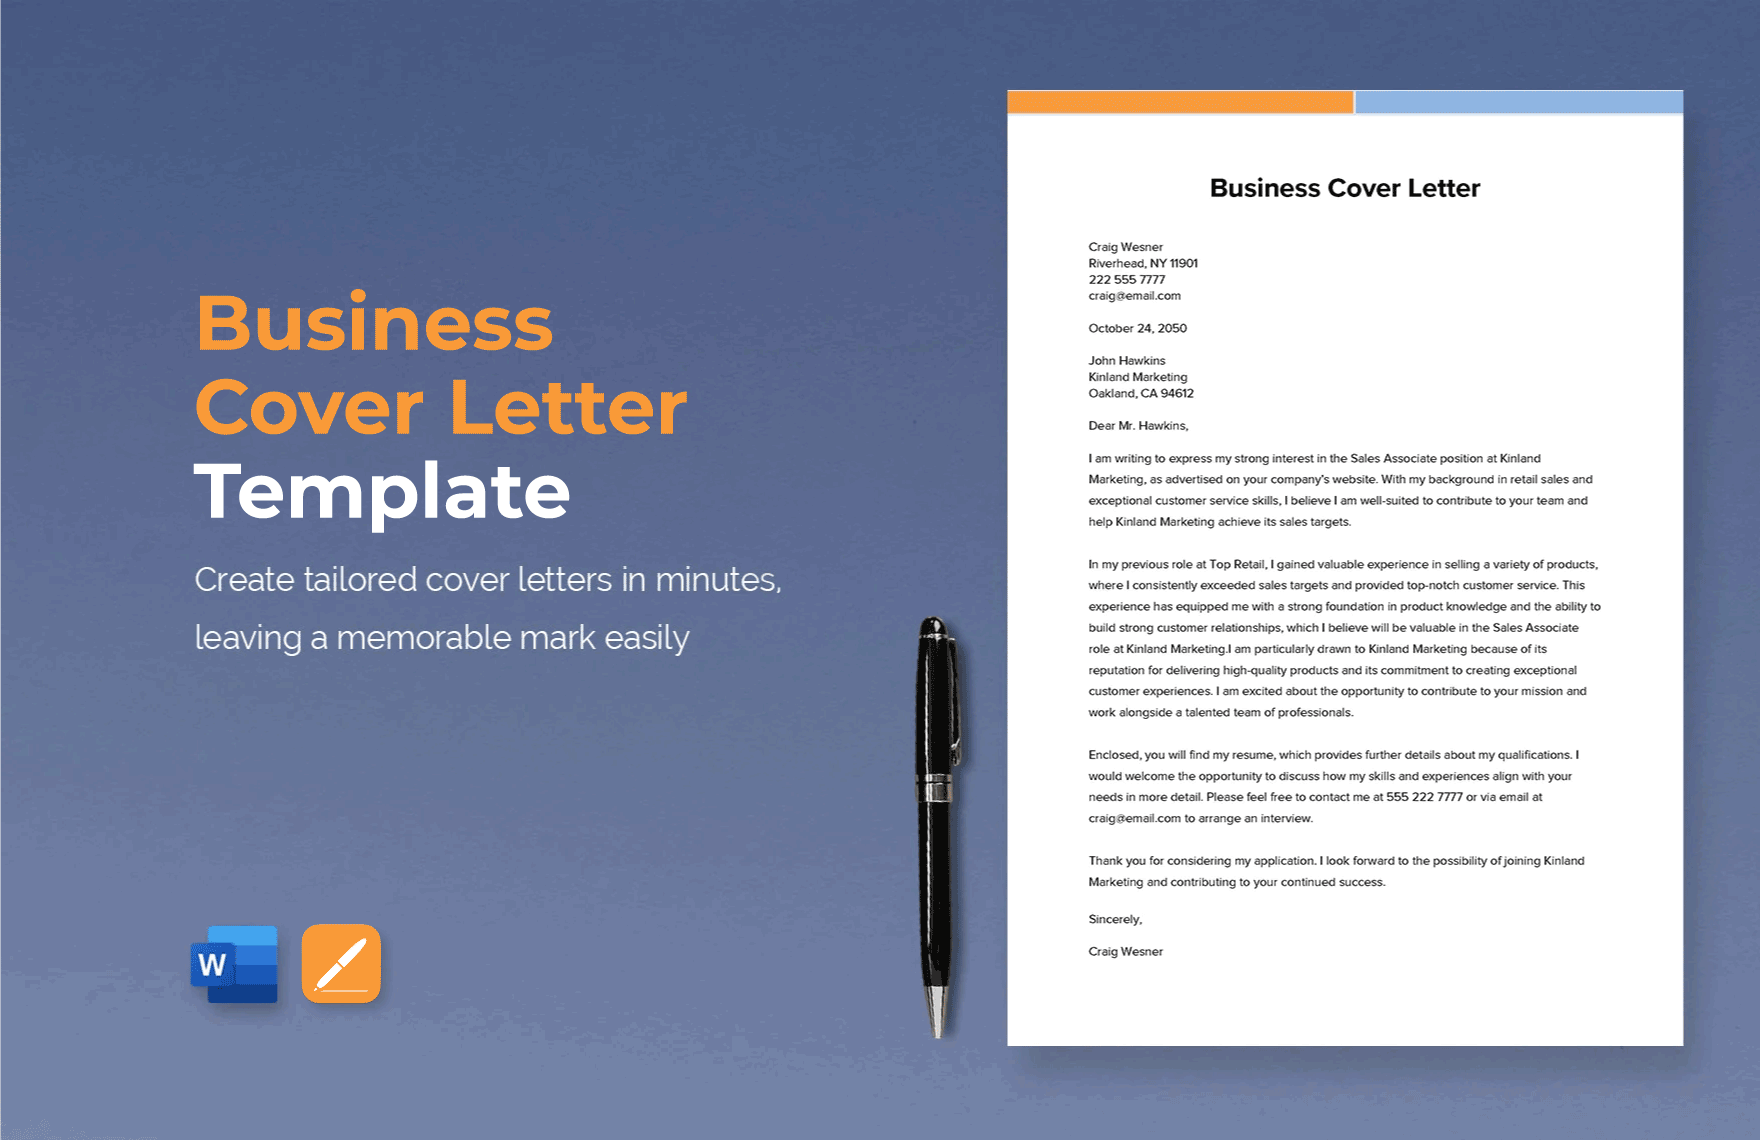 Free Business Cover Letter Template in Word, Apple Pages